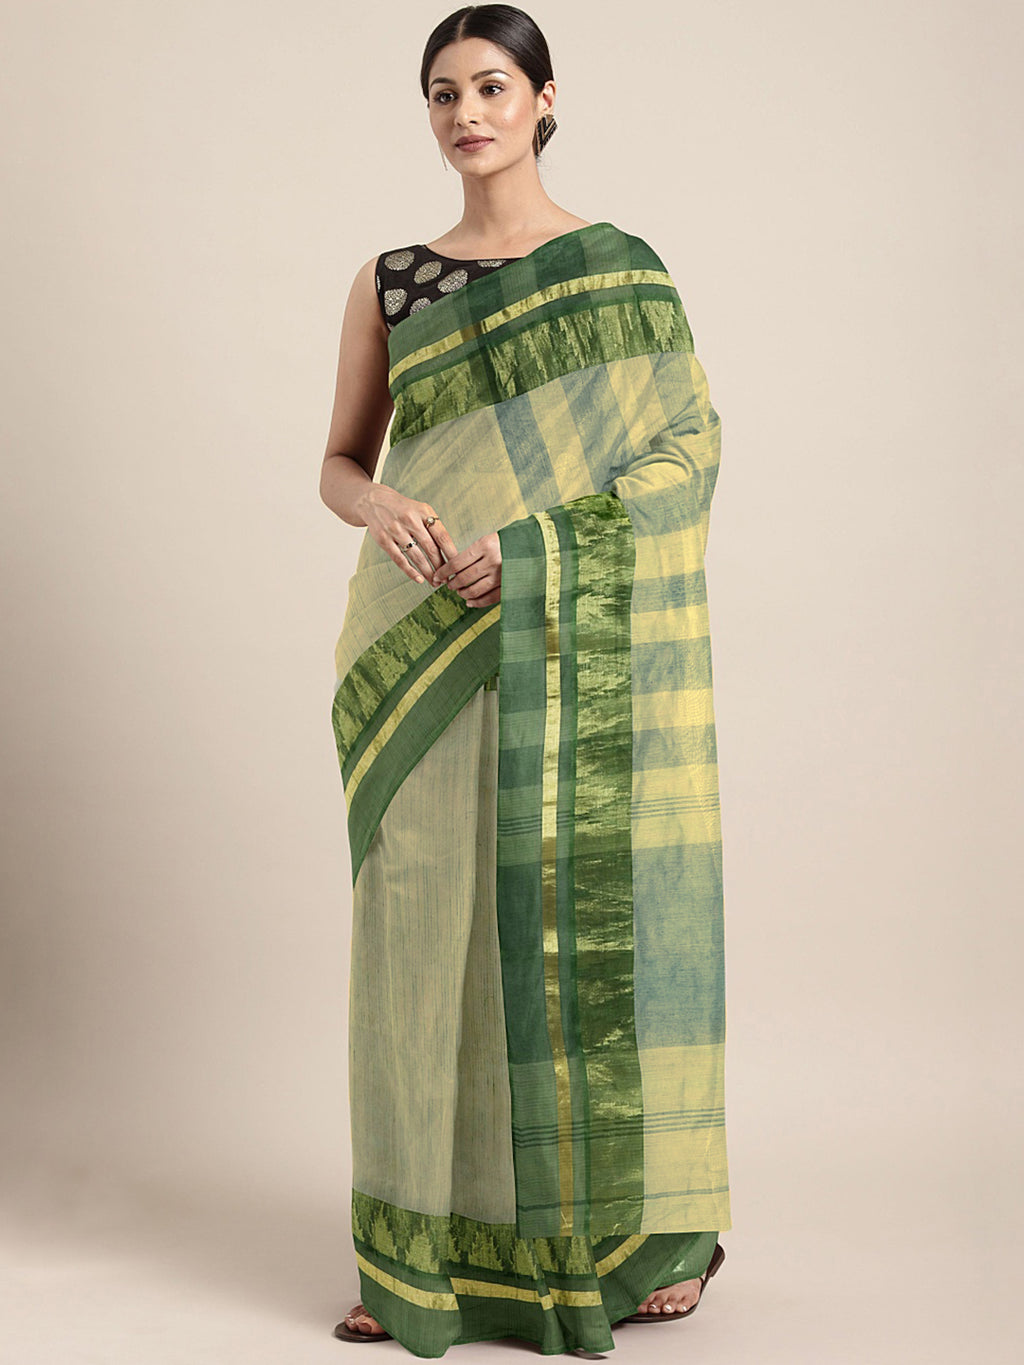 Green Tant Woven Design Saree Without Blouse Piece DUTASA036 DUTASA036-Saree-Kalakari India-DUTASA036-Geographical Indication, Hand Crafted, Heritage Prints, Natural Dyes, Sarees, Silk Cotton, Sustainable Fabrics, Taant, Tant, West Bengal, Woven-[Linen,Ethnic,wear,Fashionista,Handloom,Handicraft,Indigo,blockprint,block,print,Cotton,Chanderi,Blue, latest,classy,party,bollywood,trendy,summer,style,traditional,formal,elegant,unique,style,hand,block,print, dabu,booti,gift,present,glamorous,affordabl